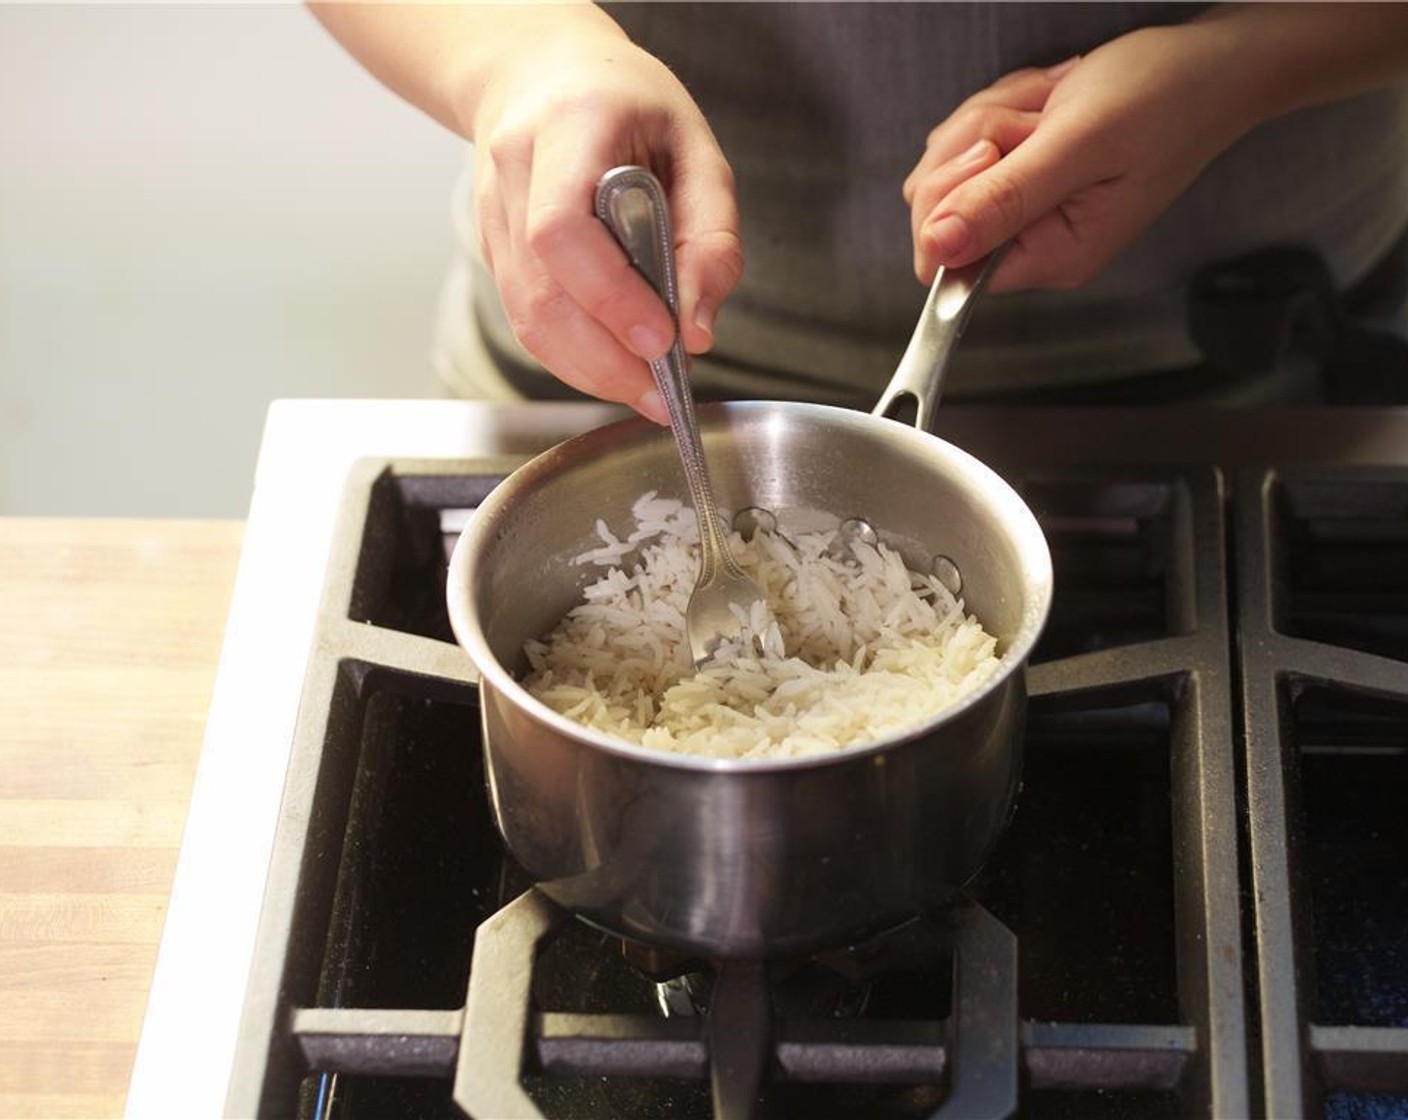 step 4 In a medium saucepan, add one cup of water and the Basmati Rice (2/3 cup). Bring to a boil over medium-high heat. Stir once, then cover and reduce heat to low and simmer for fifteen minutes. Remove from heat, fluff rice, and keep warm.